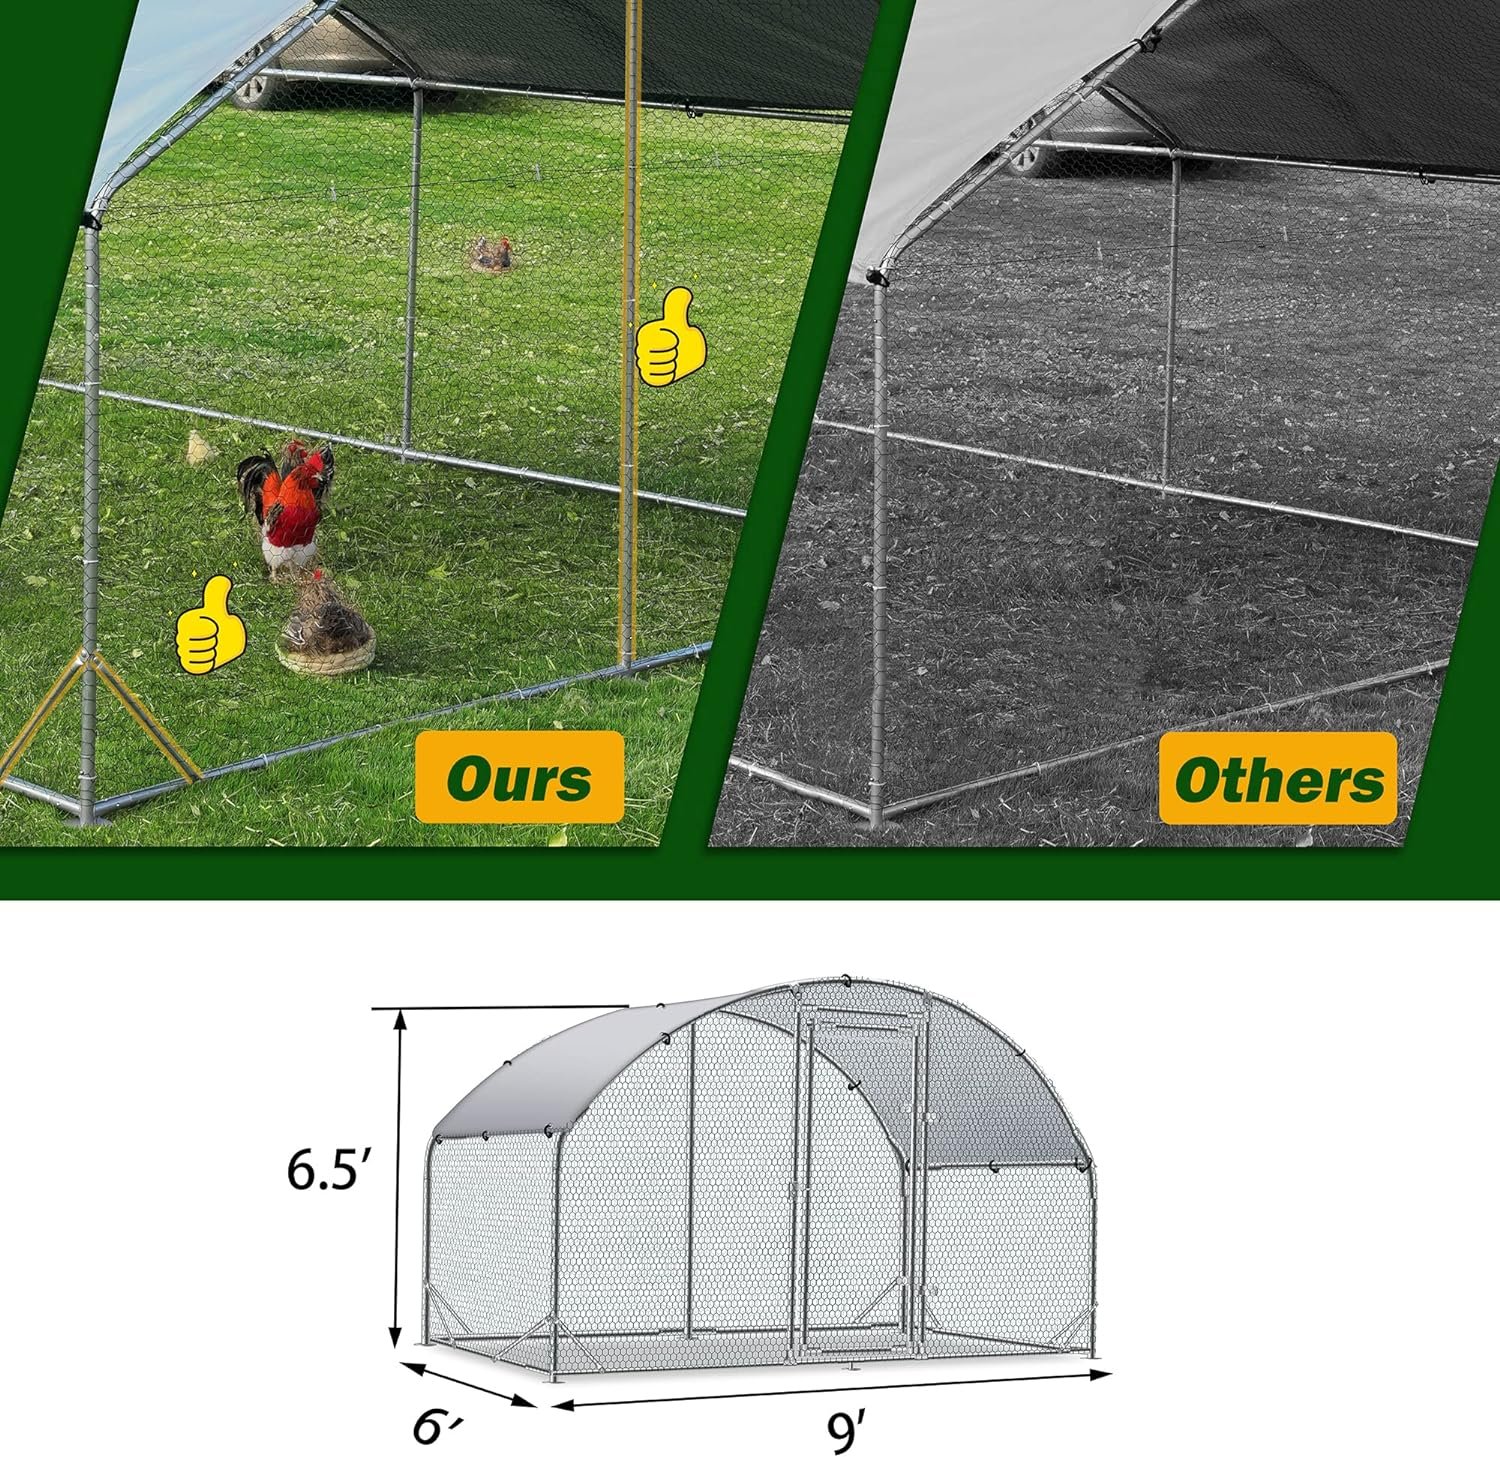 Betterhood Large Metal Chicken Coop Upgrade Tri-Supporting Wire Mesh Chicken Run,Chicken Pen with Water-Resident and Anti-UV Cover,Duck Rabbit House Outdoor(10’ W x 13’ L x 6.5’ H)